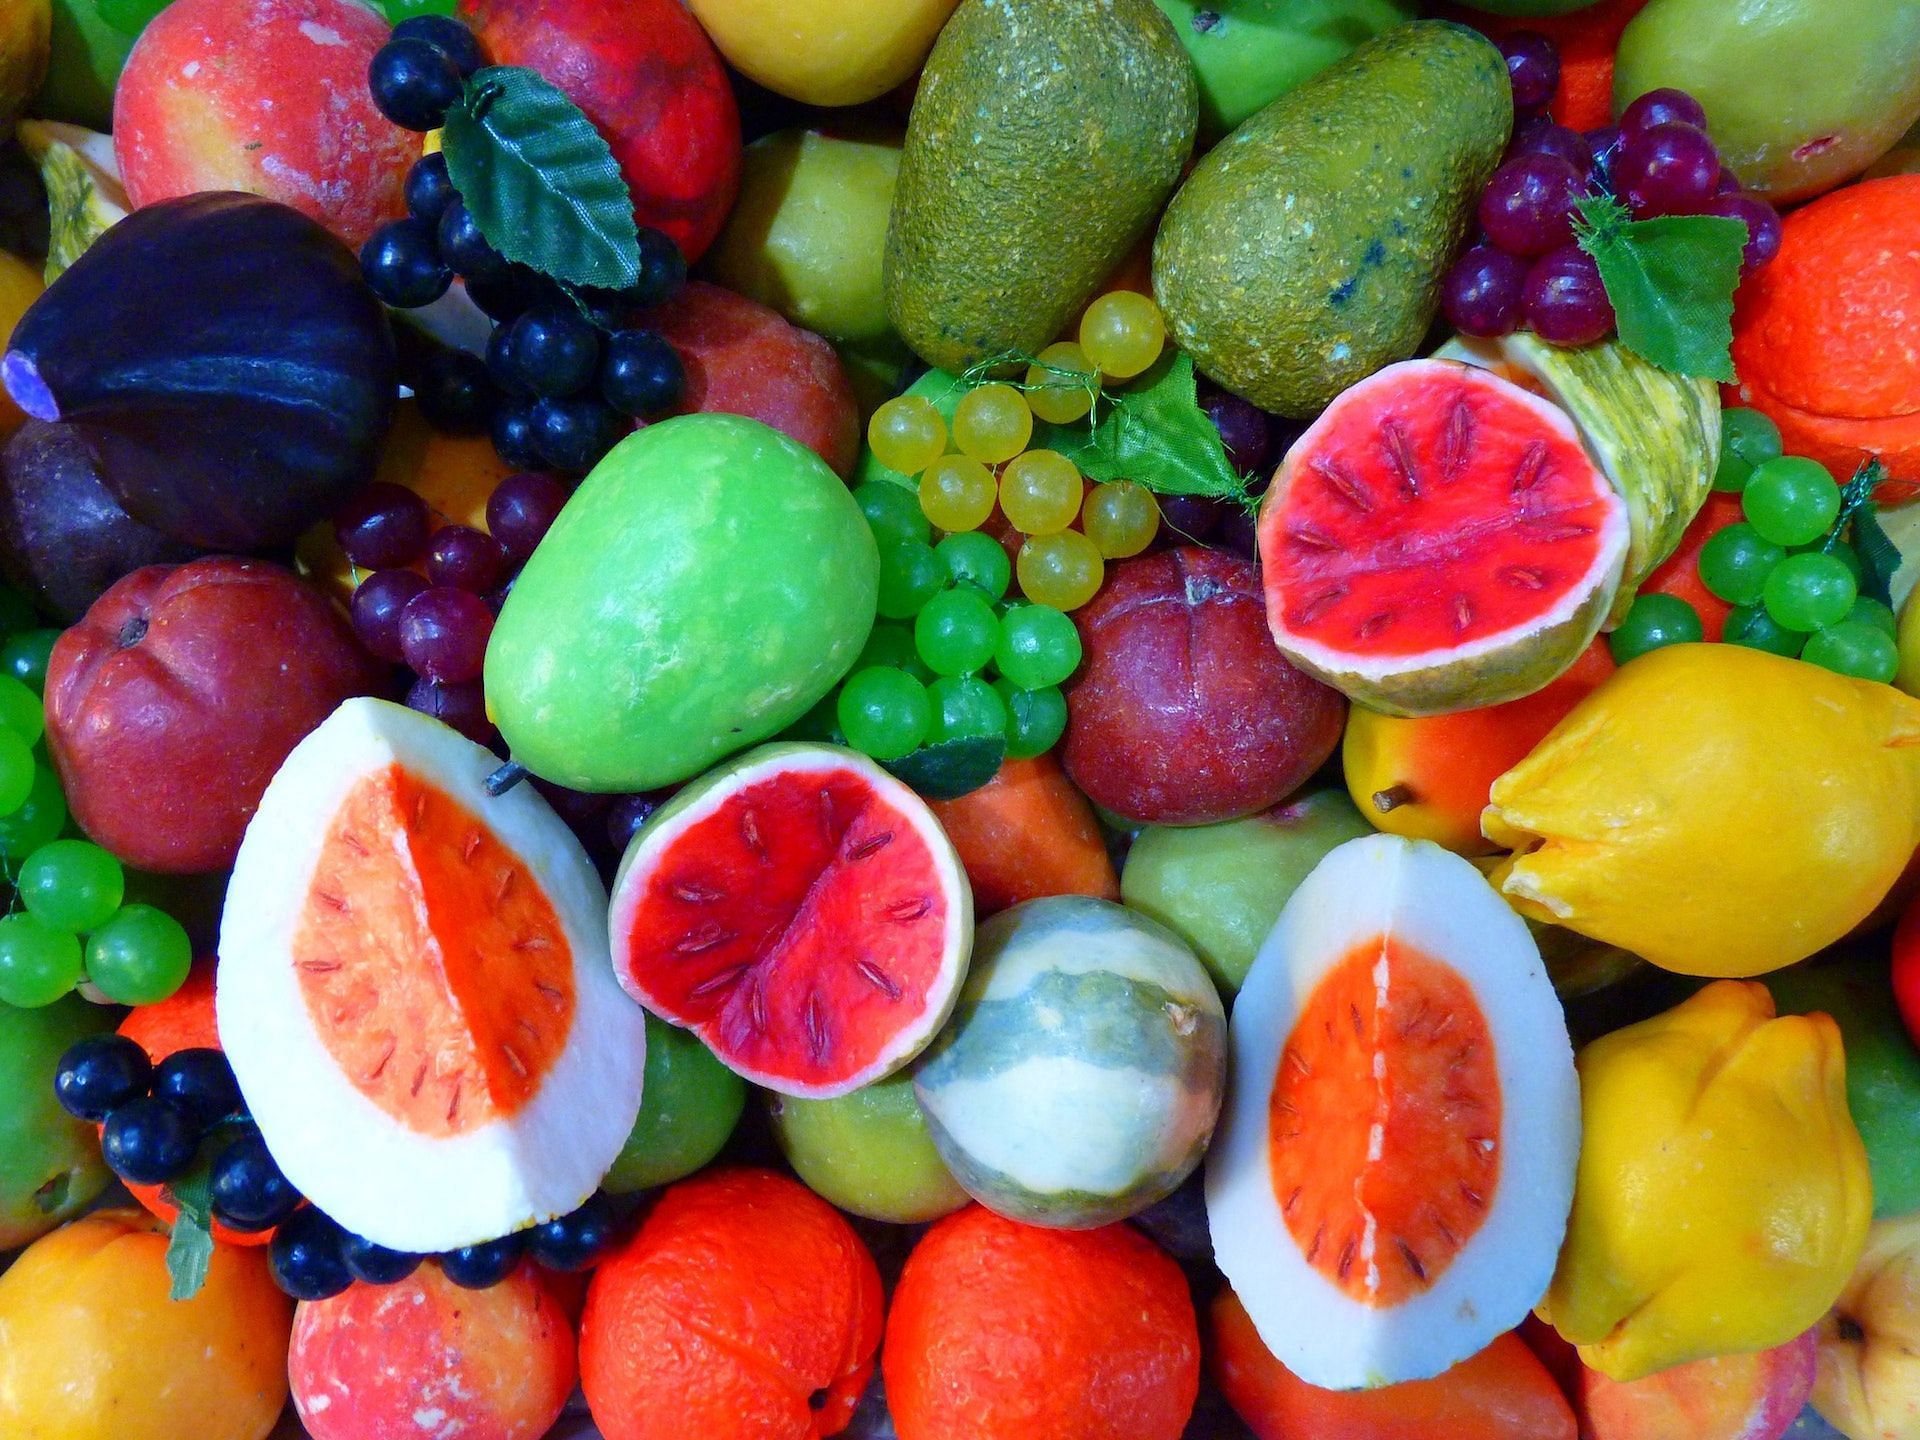 Fruits with a high glycemic index lead to a dramatic spike in blood sugar. (Photo via Pexels/Pixabay)